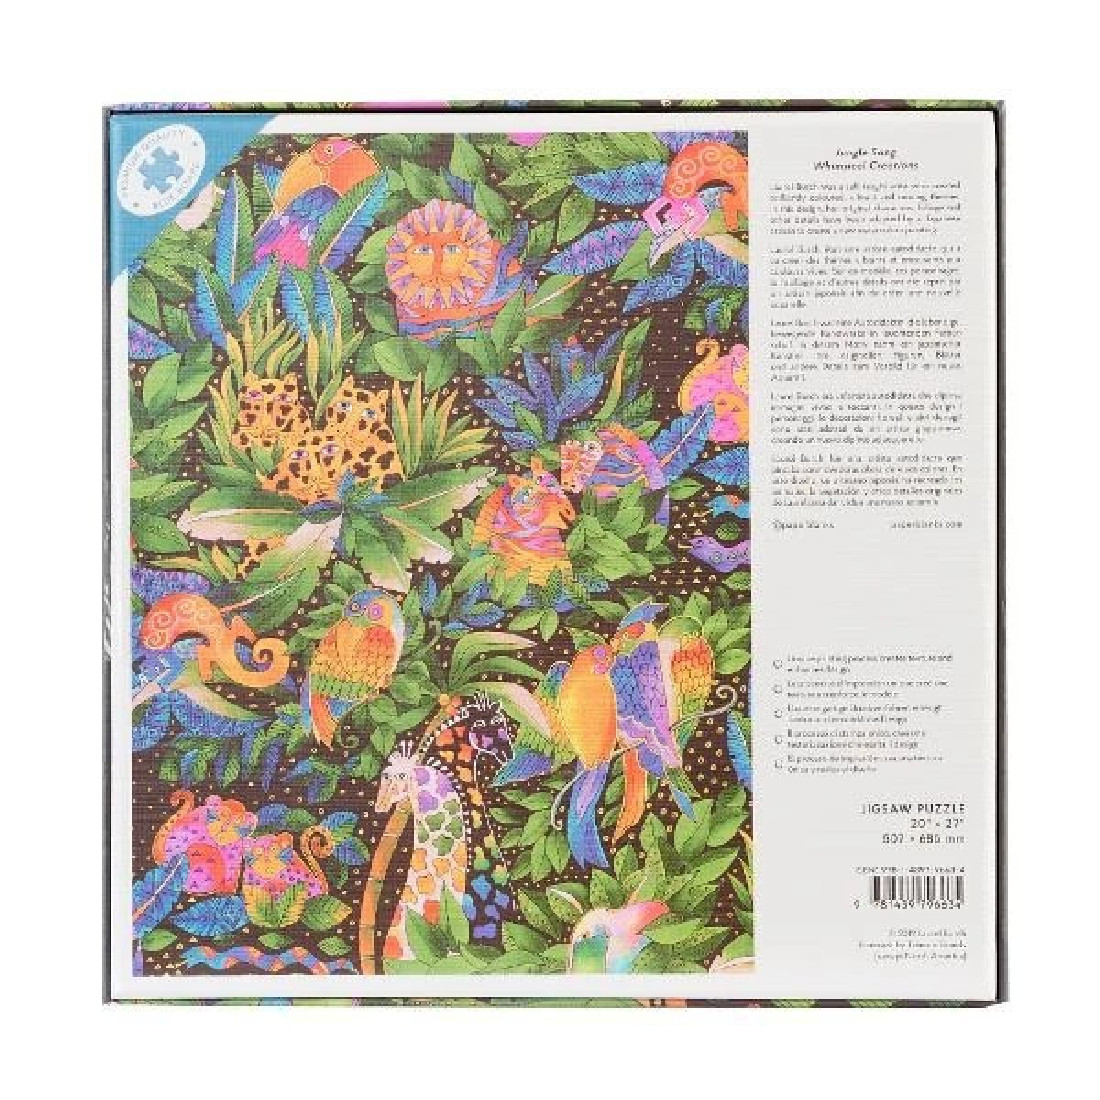 Jigsaw puzzle 1000pcs, Jungle Song, Whimsical collection Paperblanks